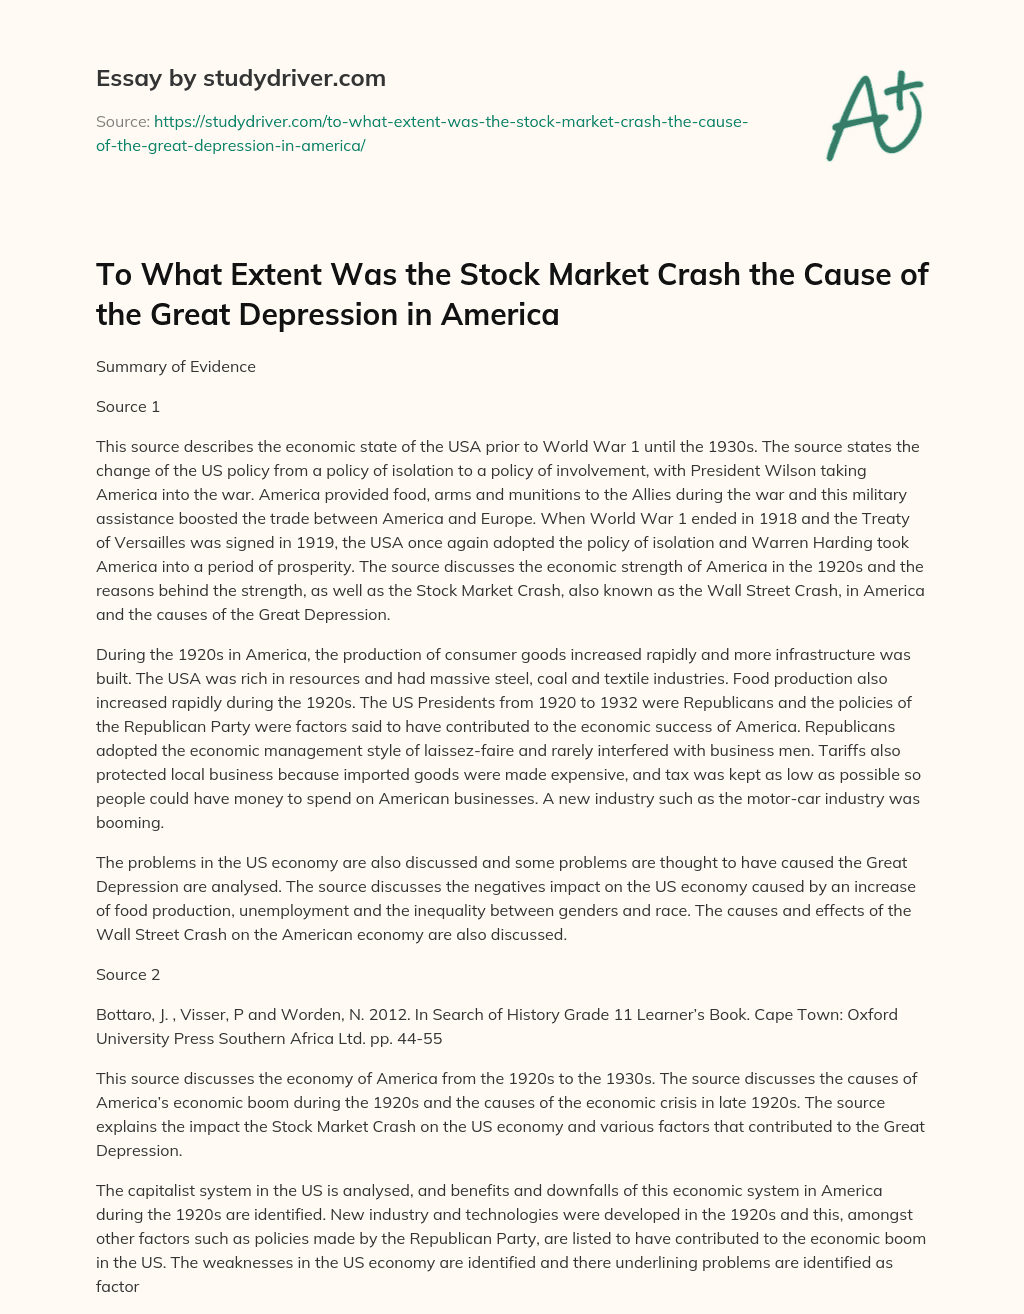 To what Extent was the Stock Market Crash the Cause of the Great Depression in America essay